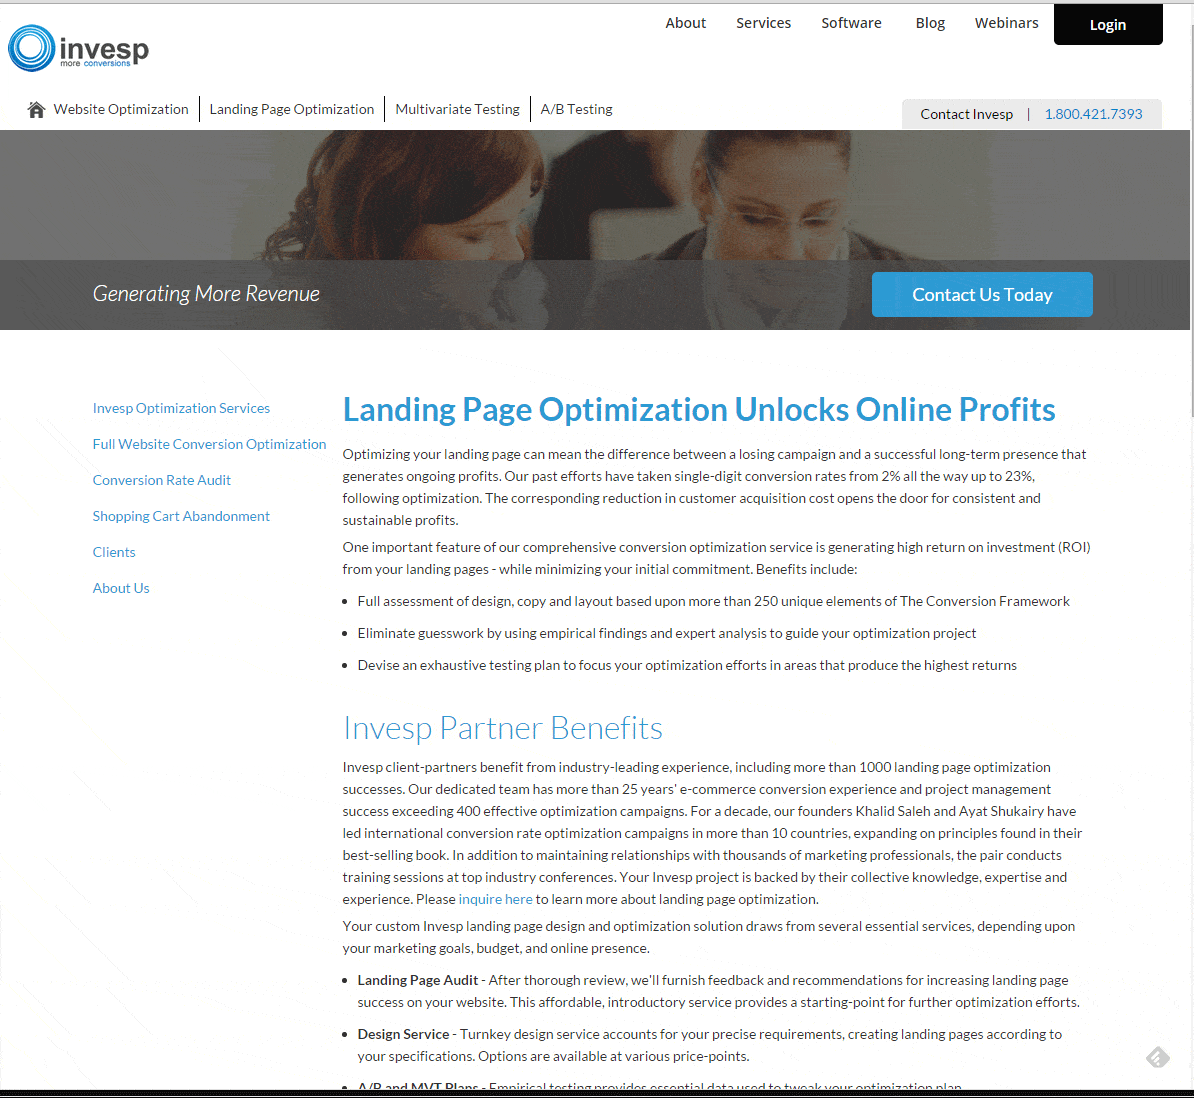 Invesp page for landing page optimization